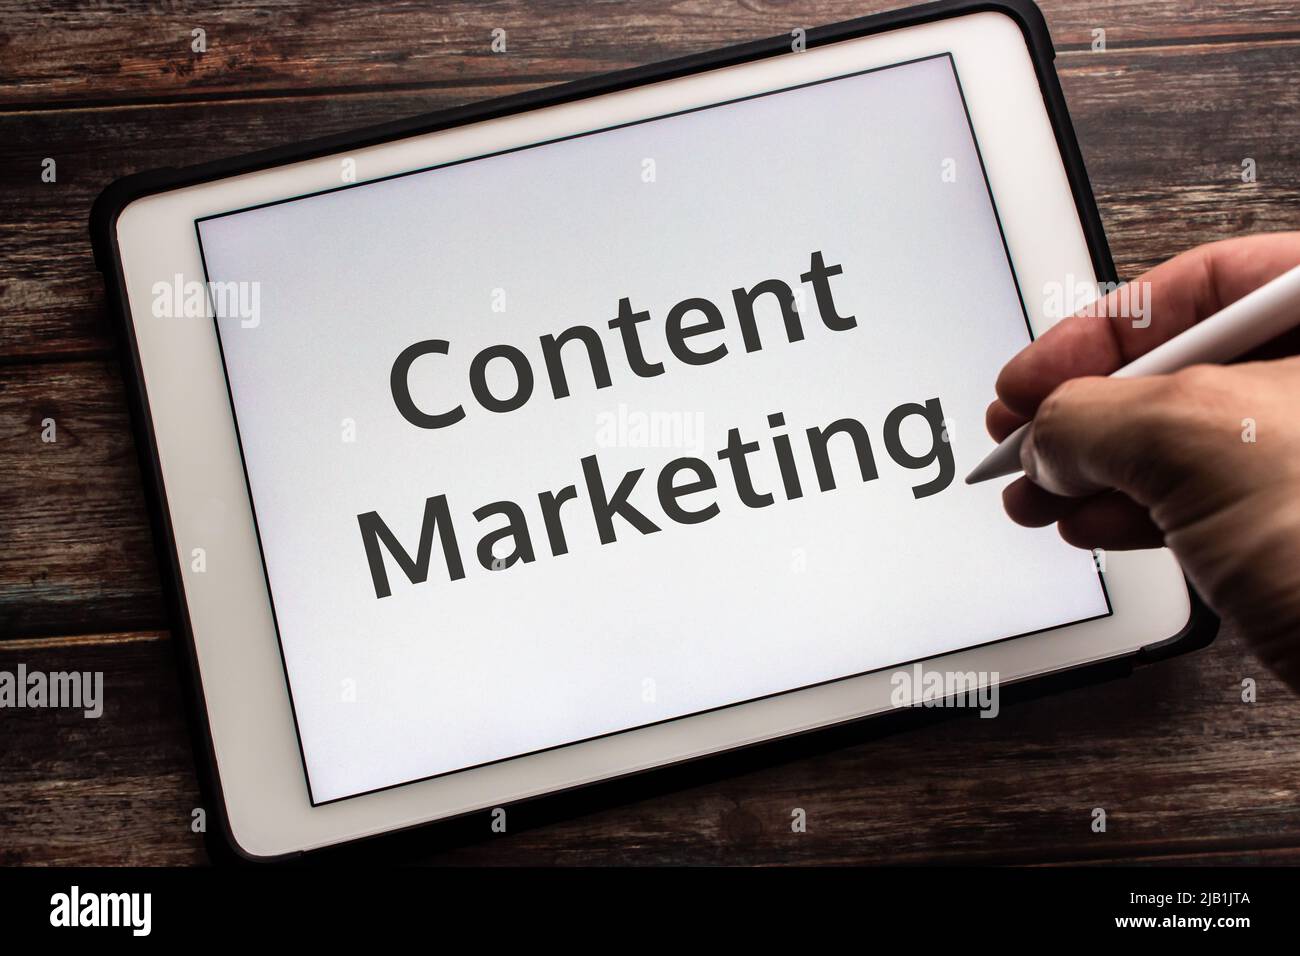 Keyword Content Marketing on tablet. A way of marketing focused on creating, publishing, & distributing content for a target user. Man holding a pen Stock Photo